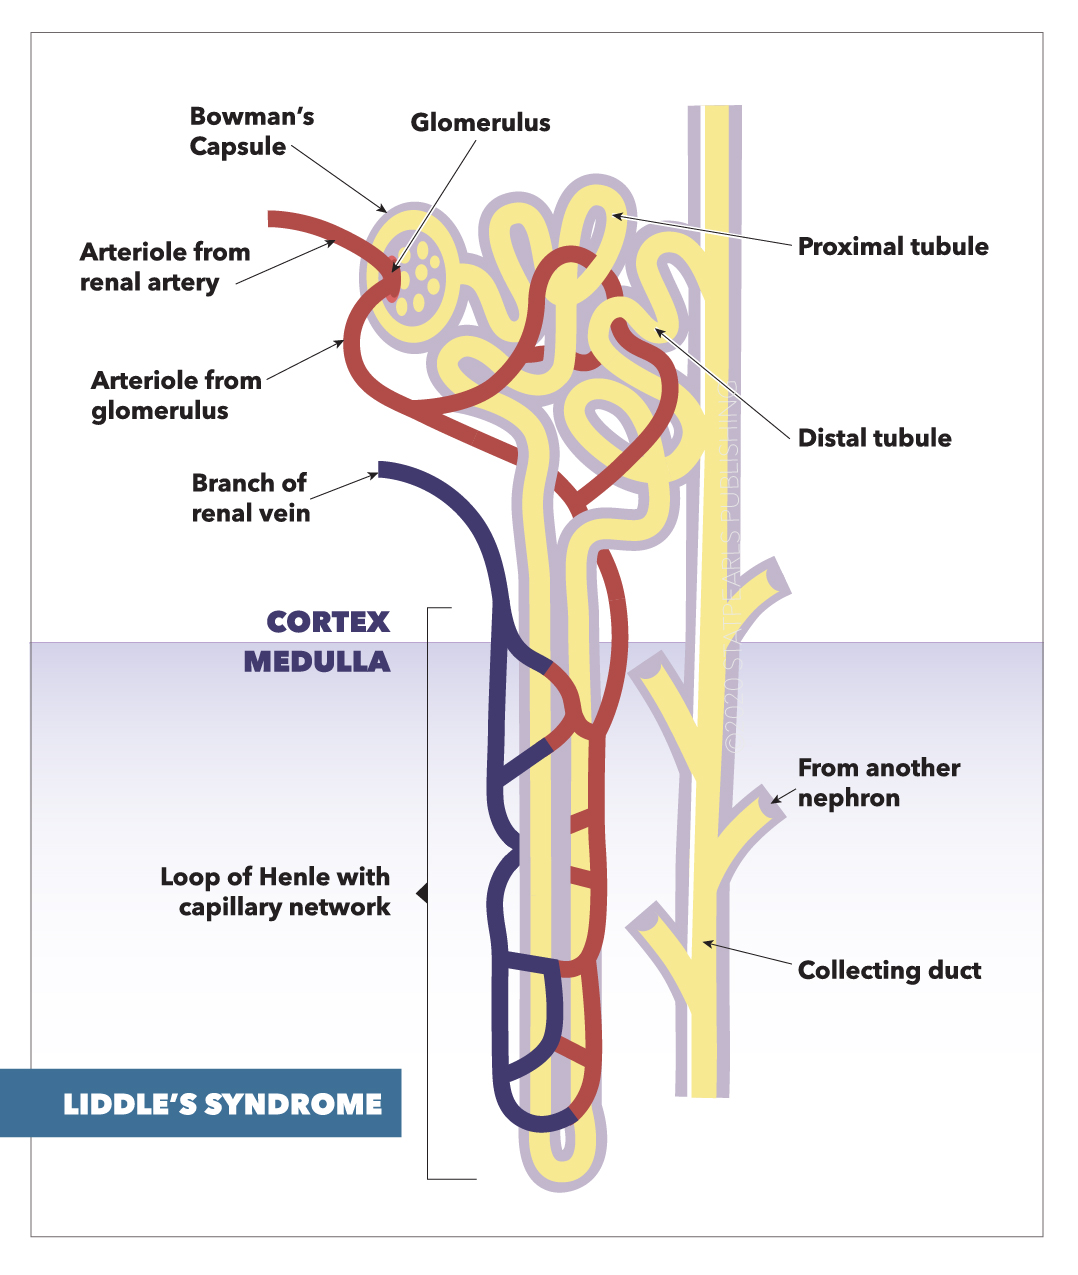 Liddle's syndrome, arteriole from renal artery, arteriole from glomerulus, Loop of Henle with capillary network,  glomerulus,